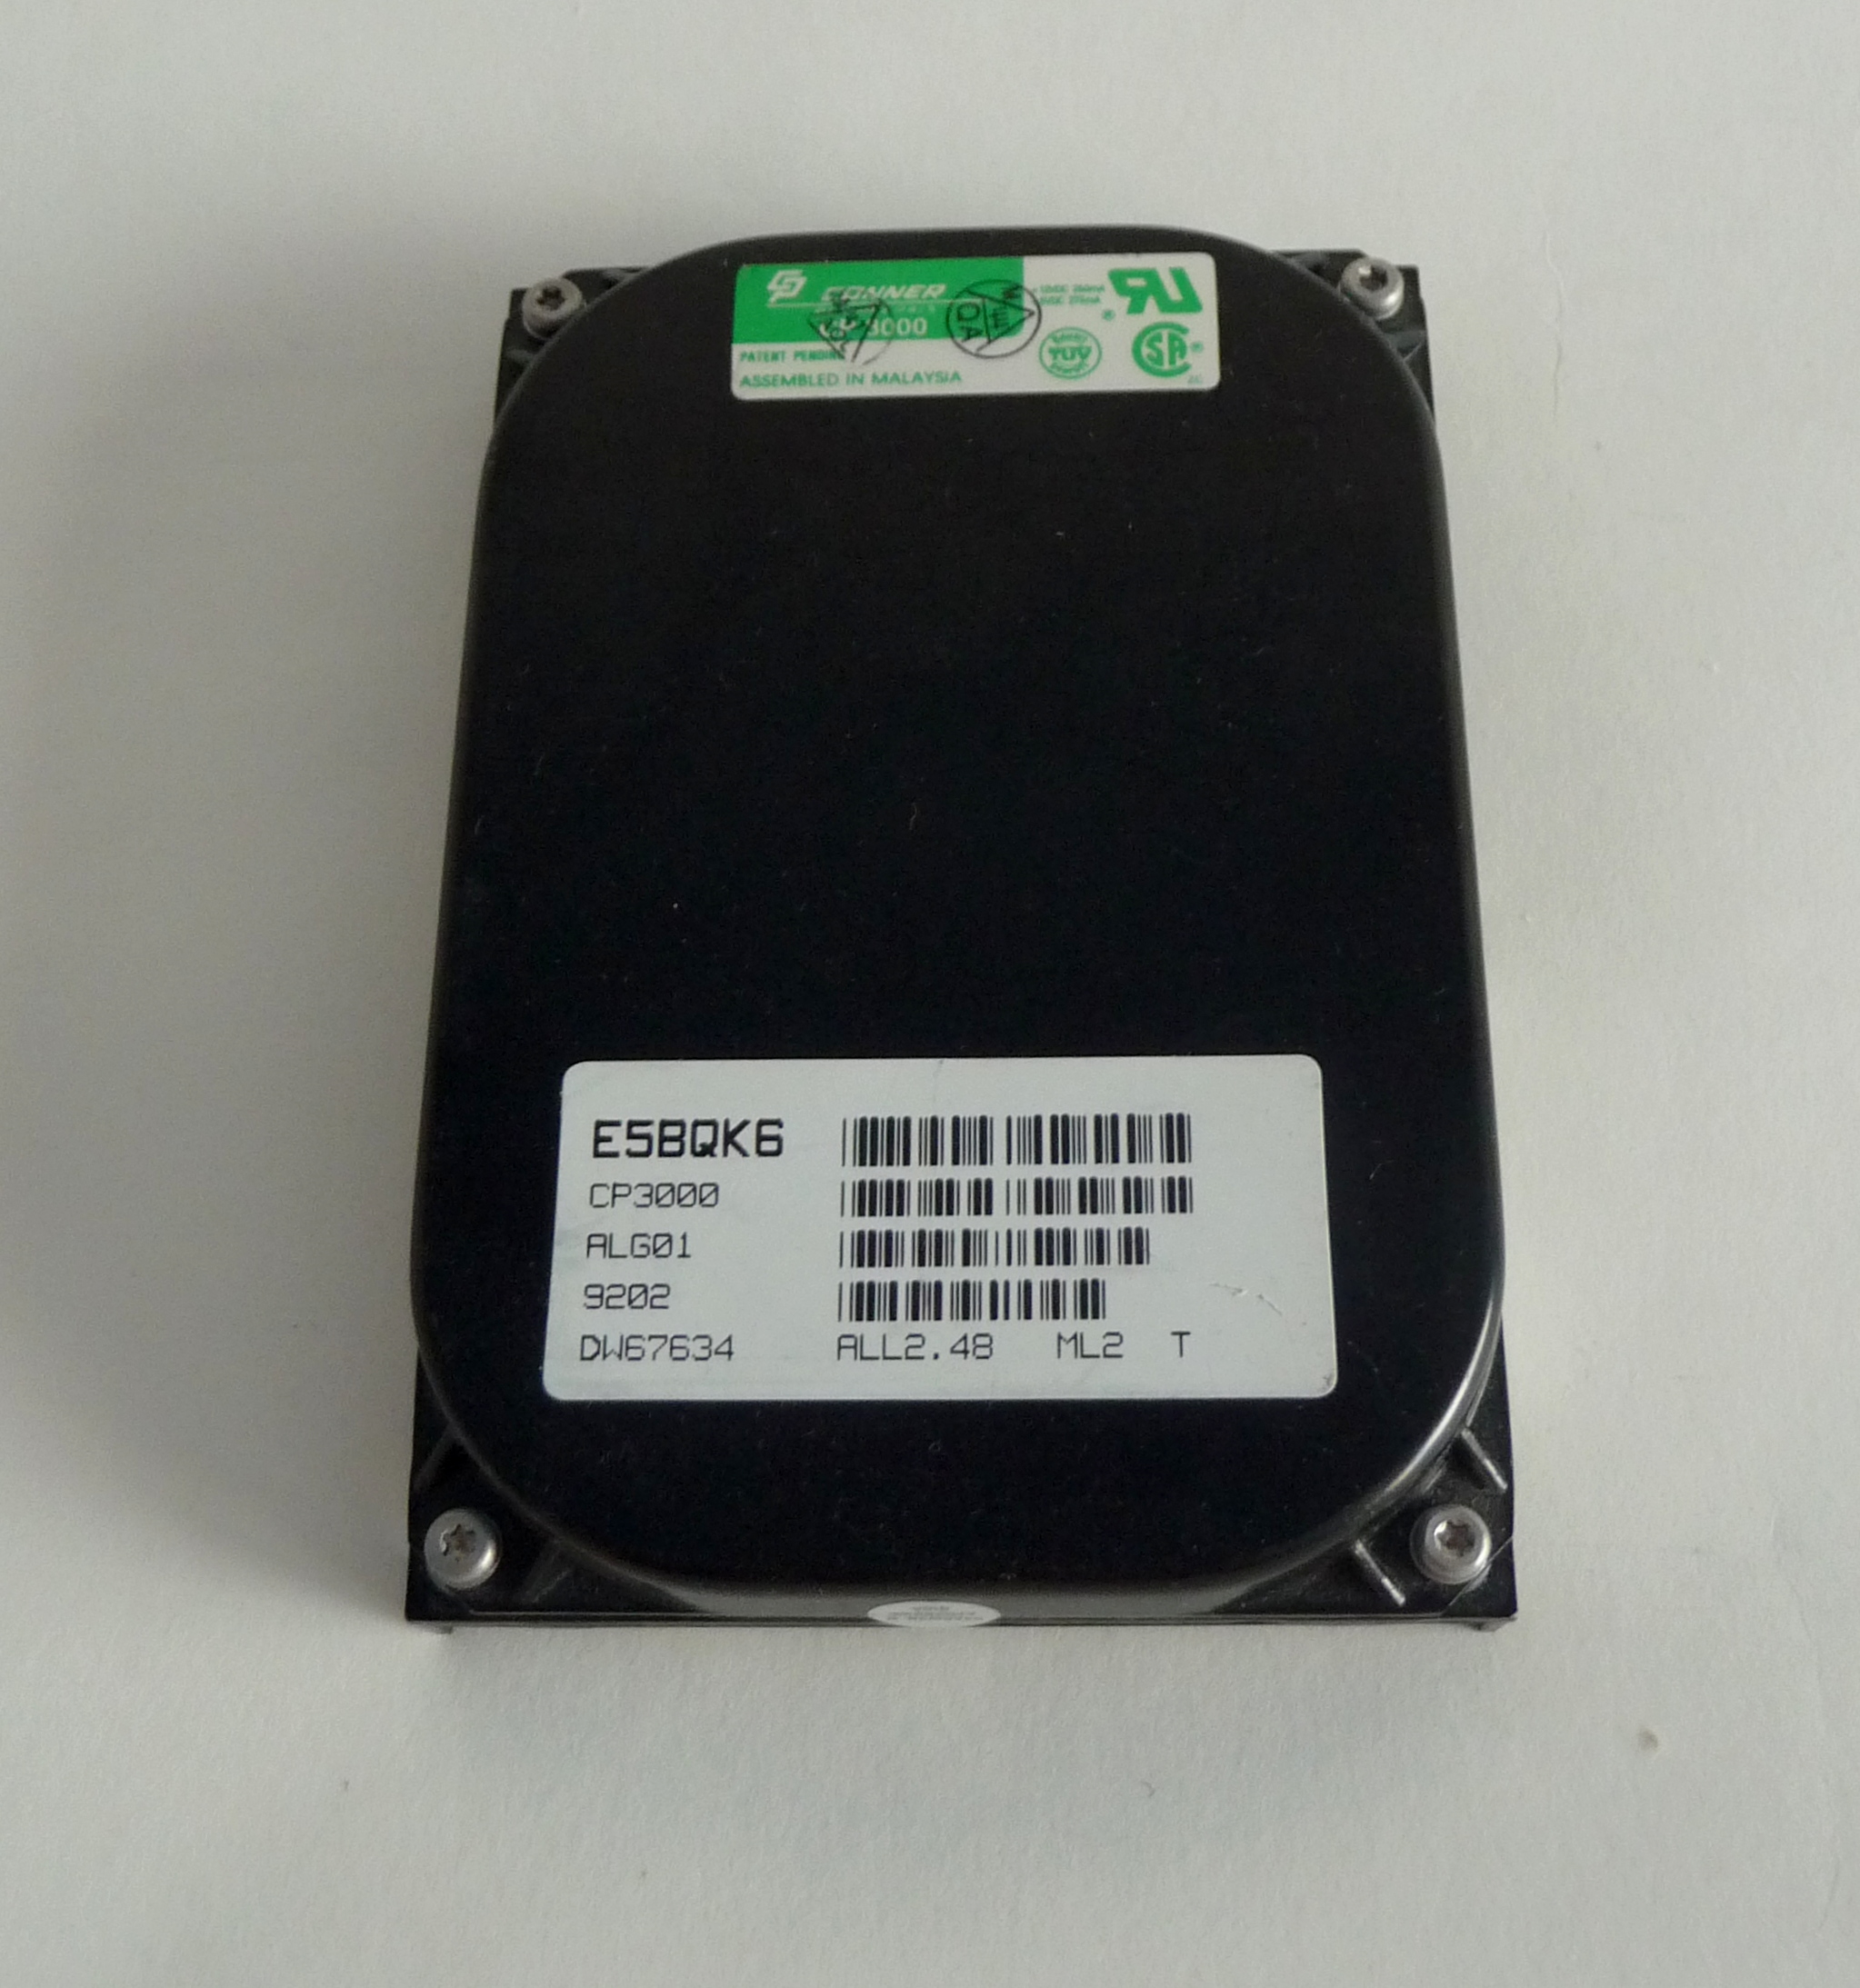 File:Conner CP3000 hard drive (1).jpg - Wikimedia Commons